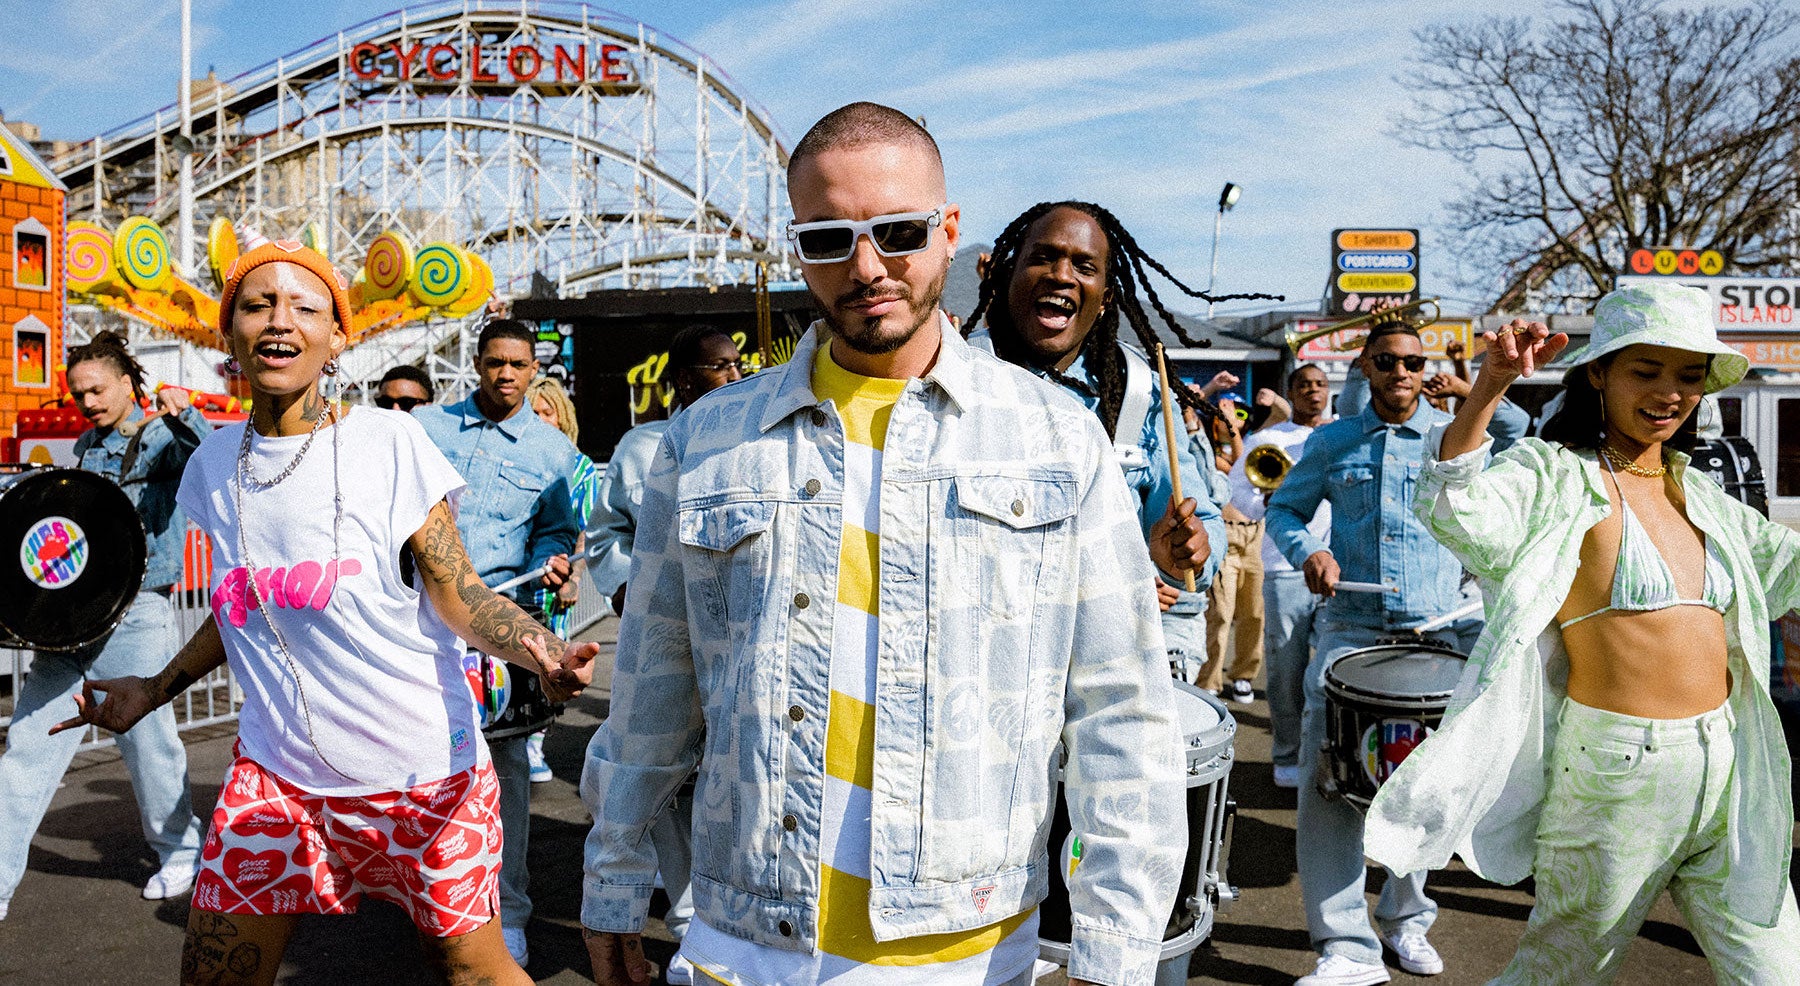 New Guess x J Balvin Amor Collection